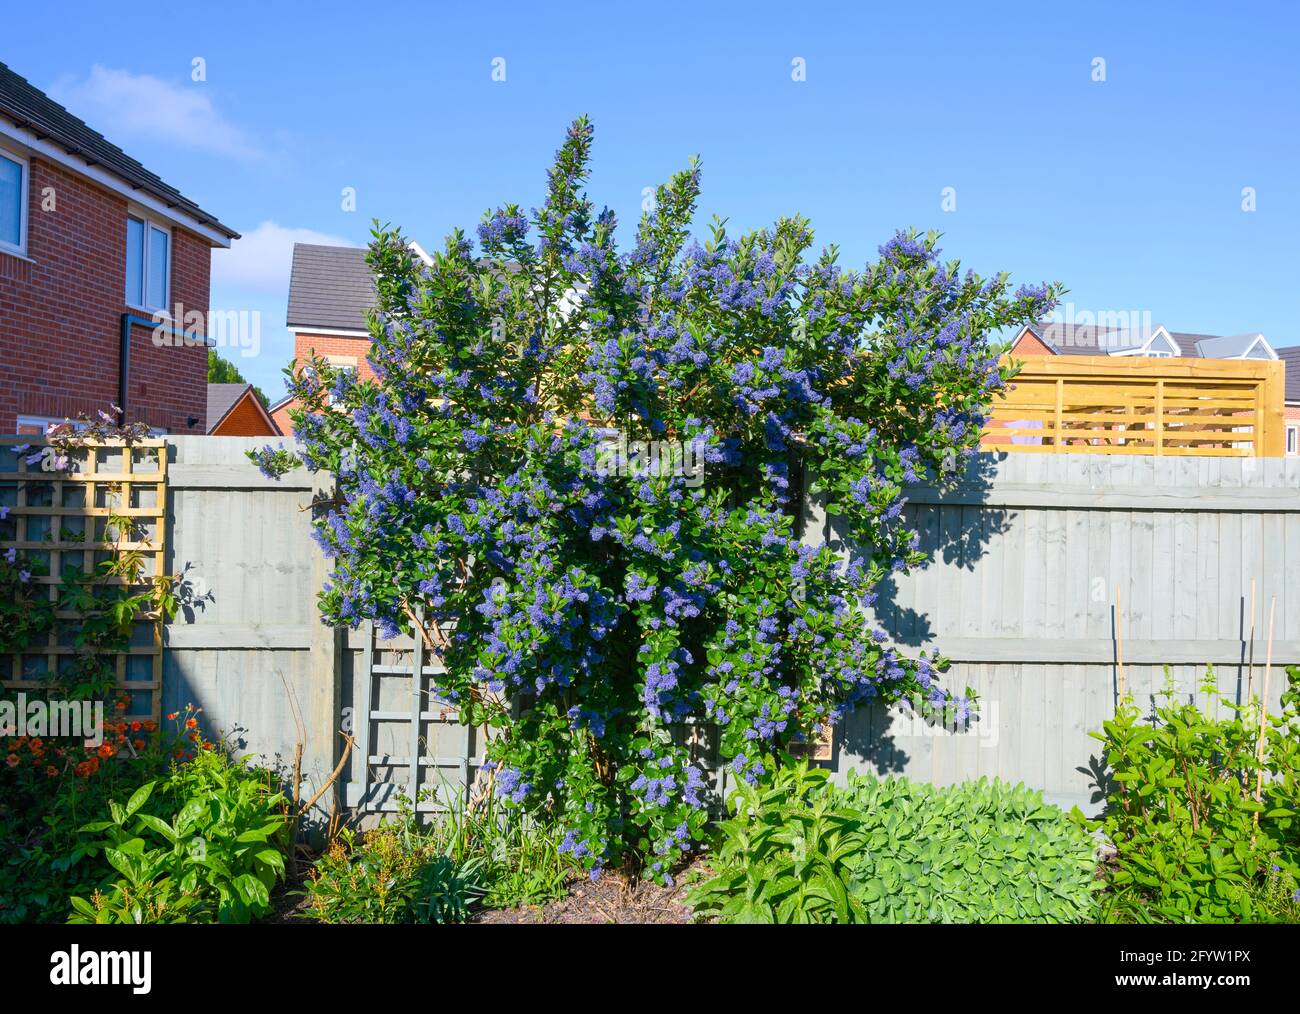 Wide view of a beautiful evergreen Ceanothus shrub (also known as a Californian Lilac) under a blue sky Stock Photo